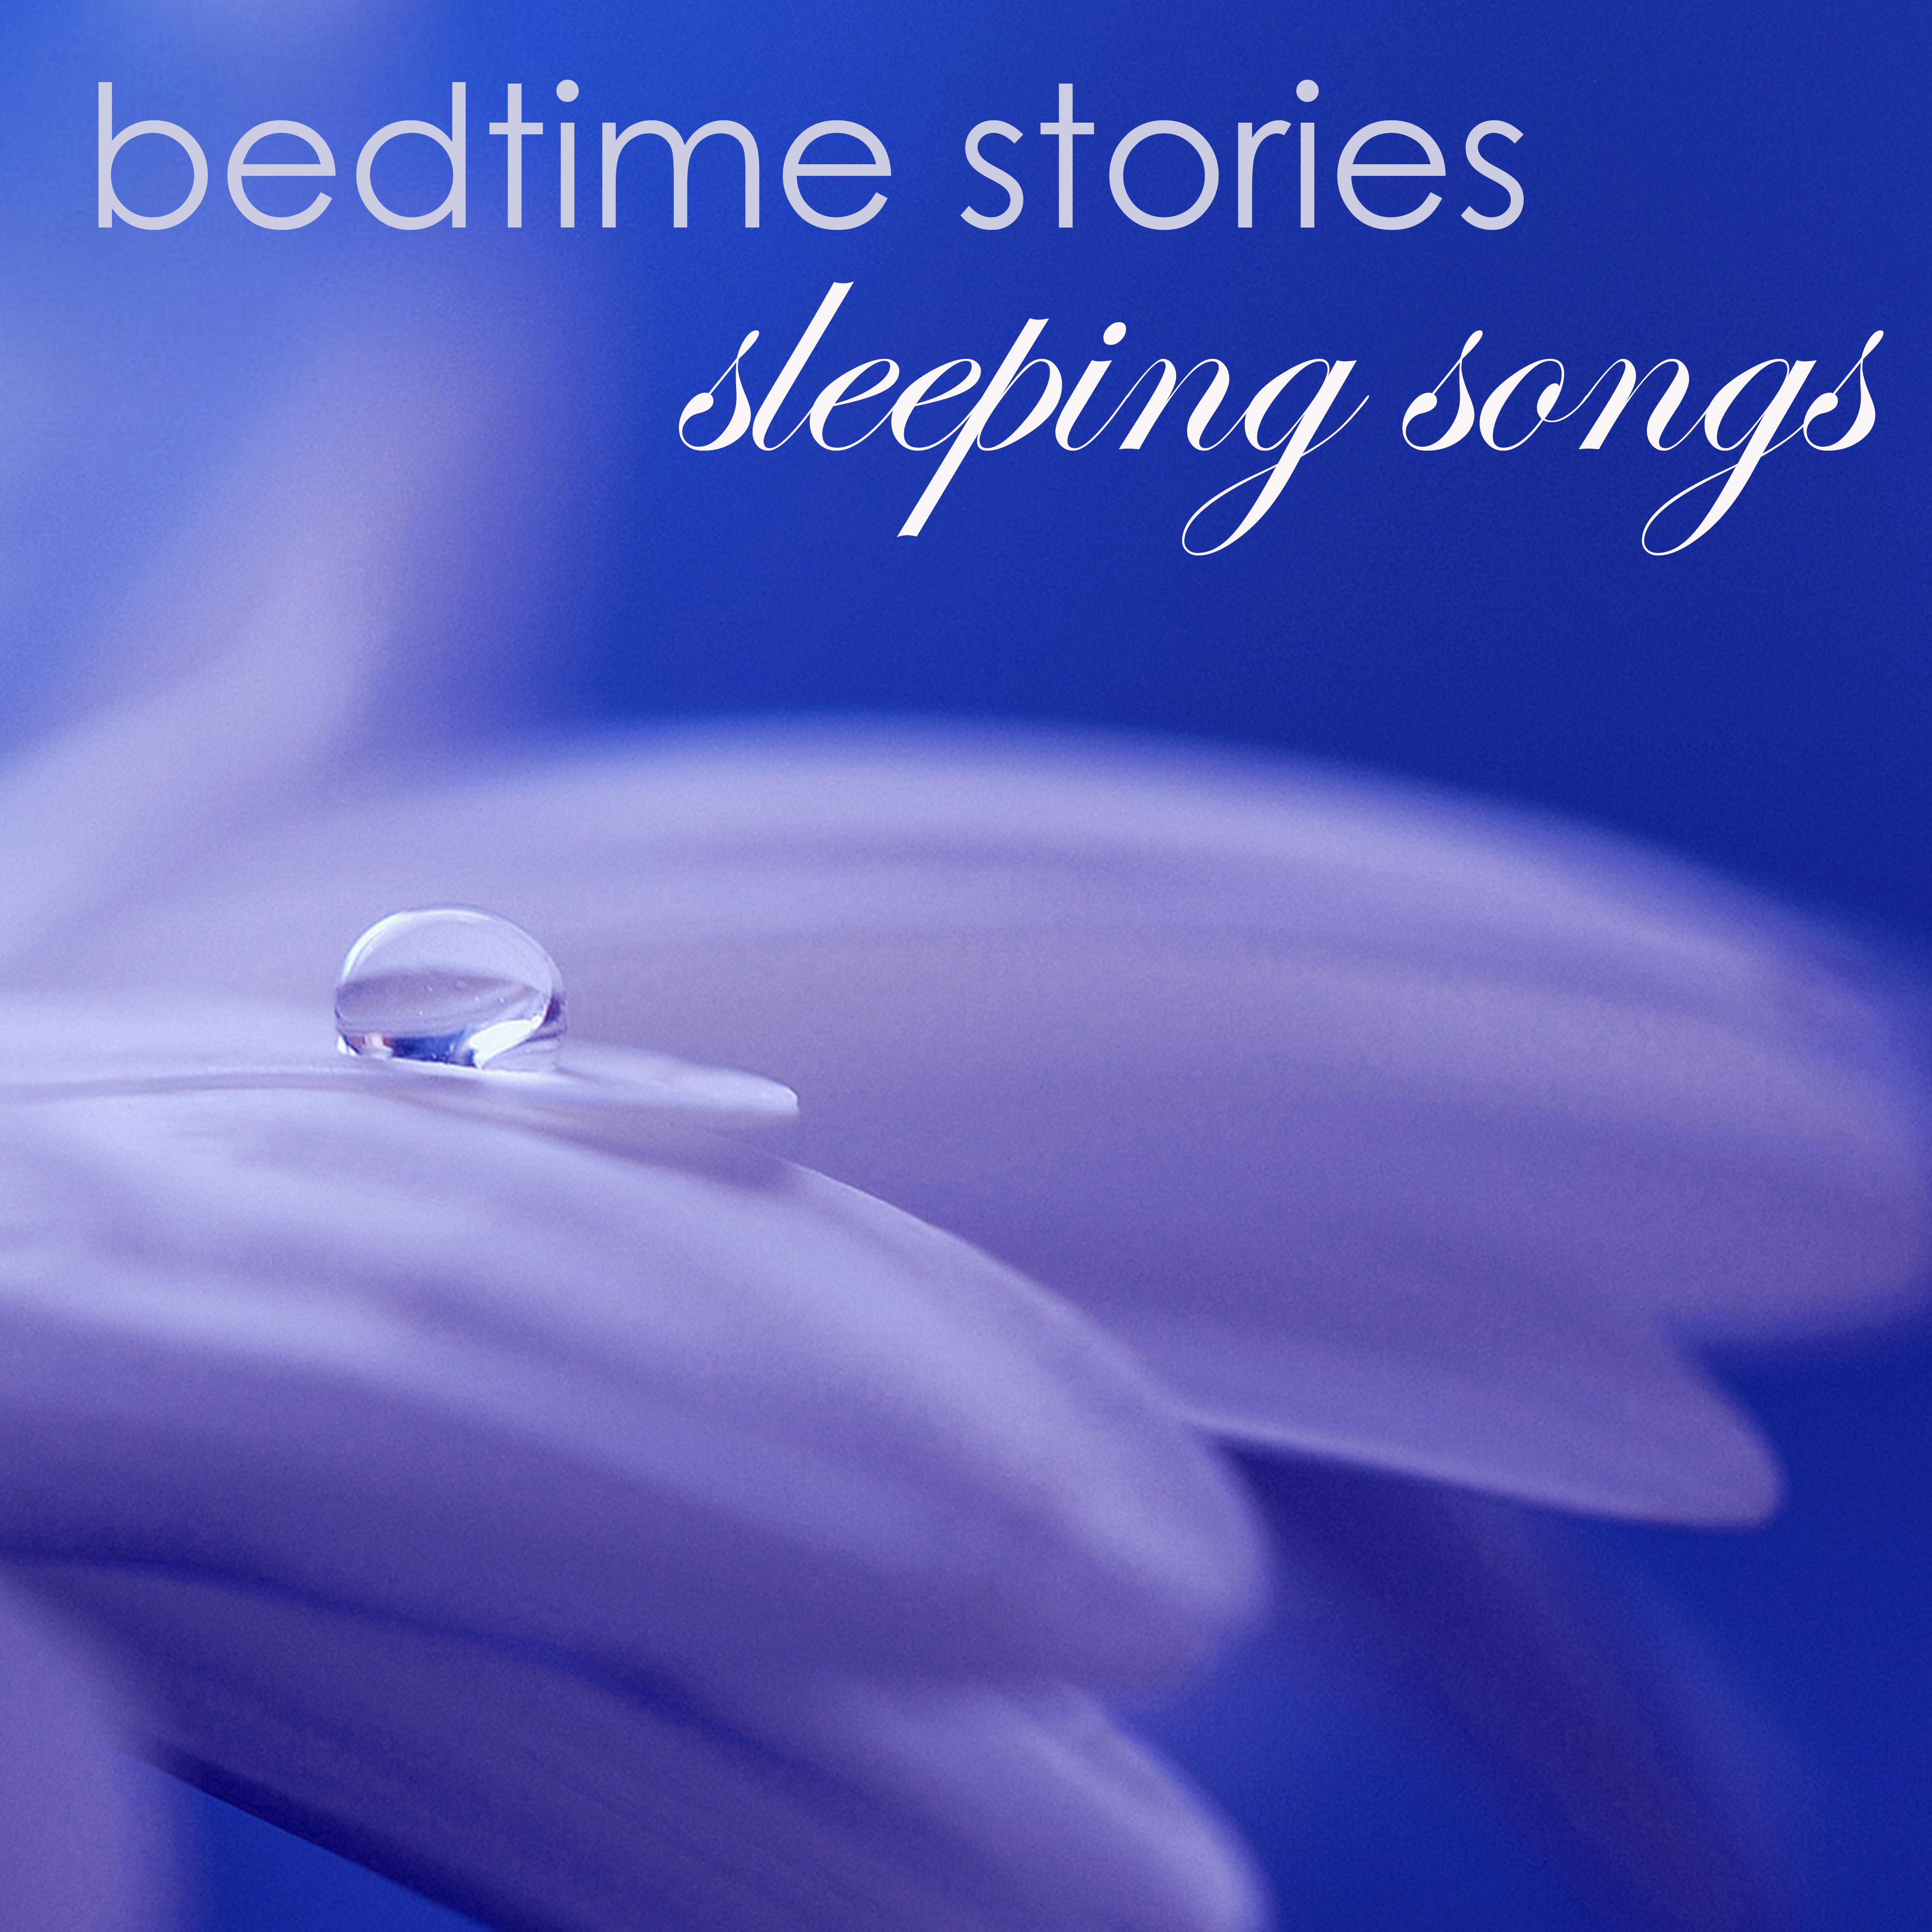 Bedtime Stories Sleeping Songs – Soft Calming Sleep Music with Relaxing Nature Sounds for a Good Night Sleep